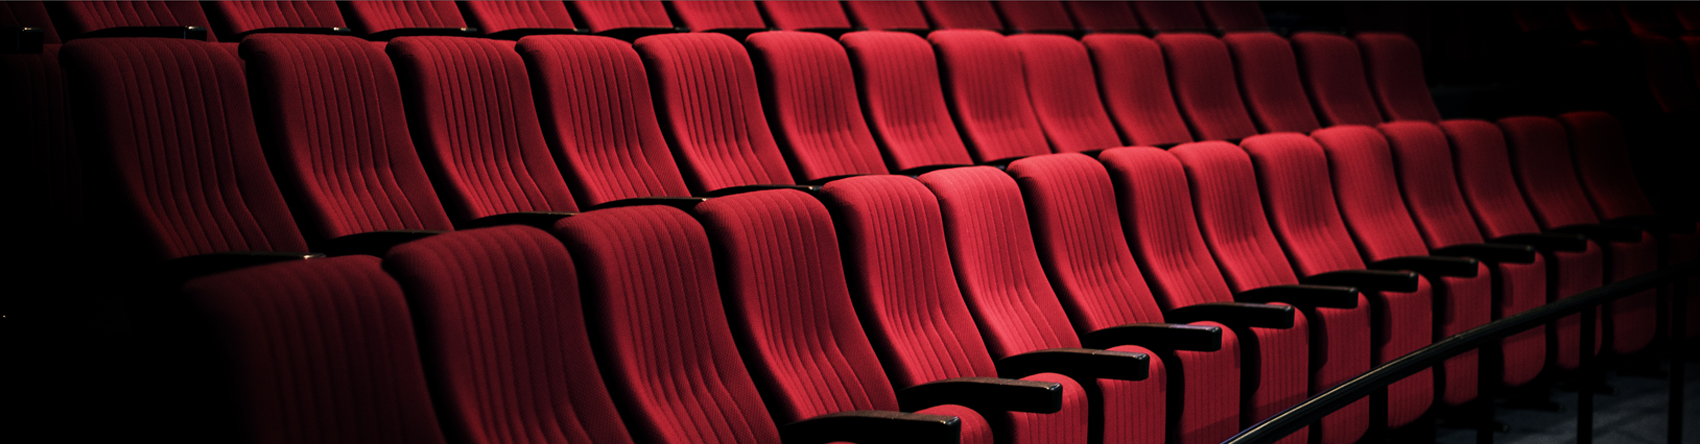 Movie theater with red seats